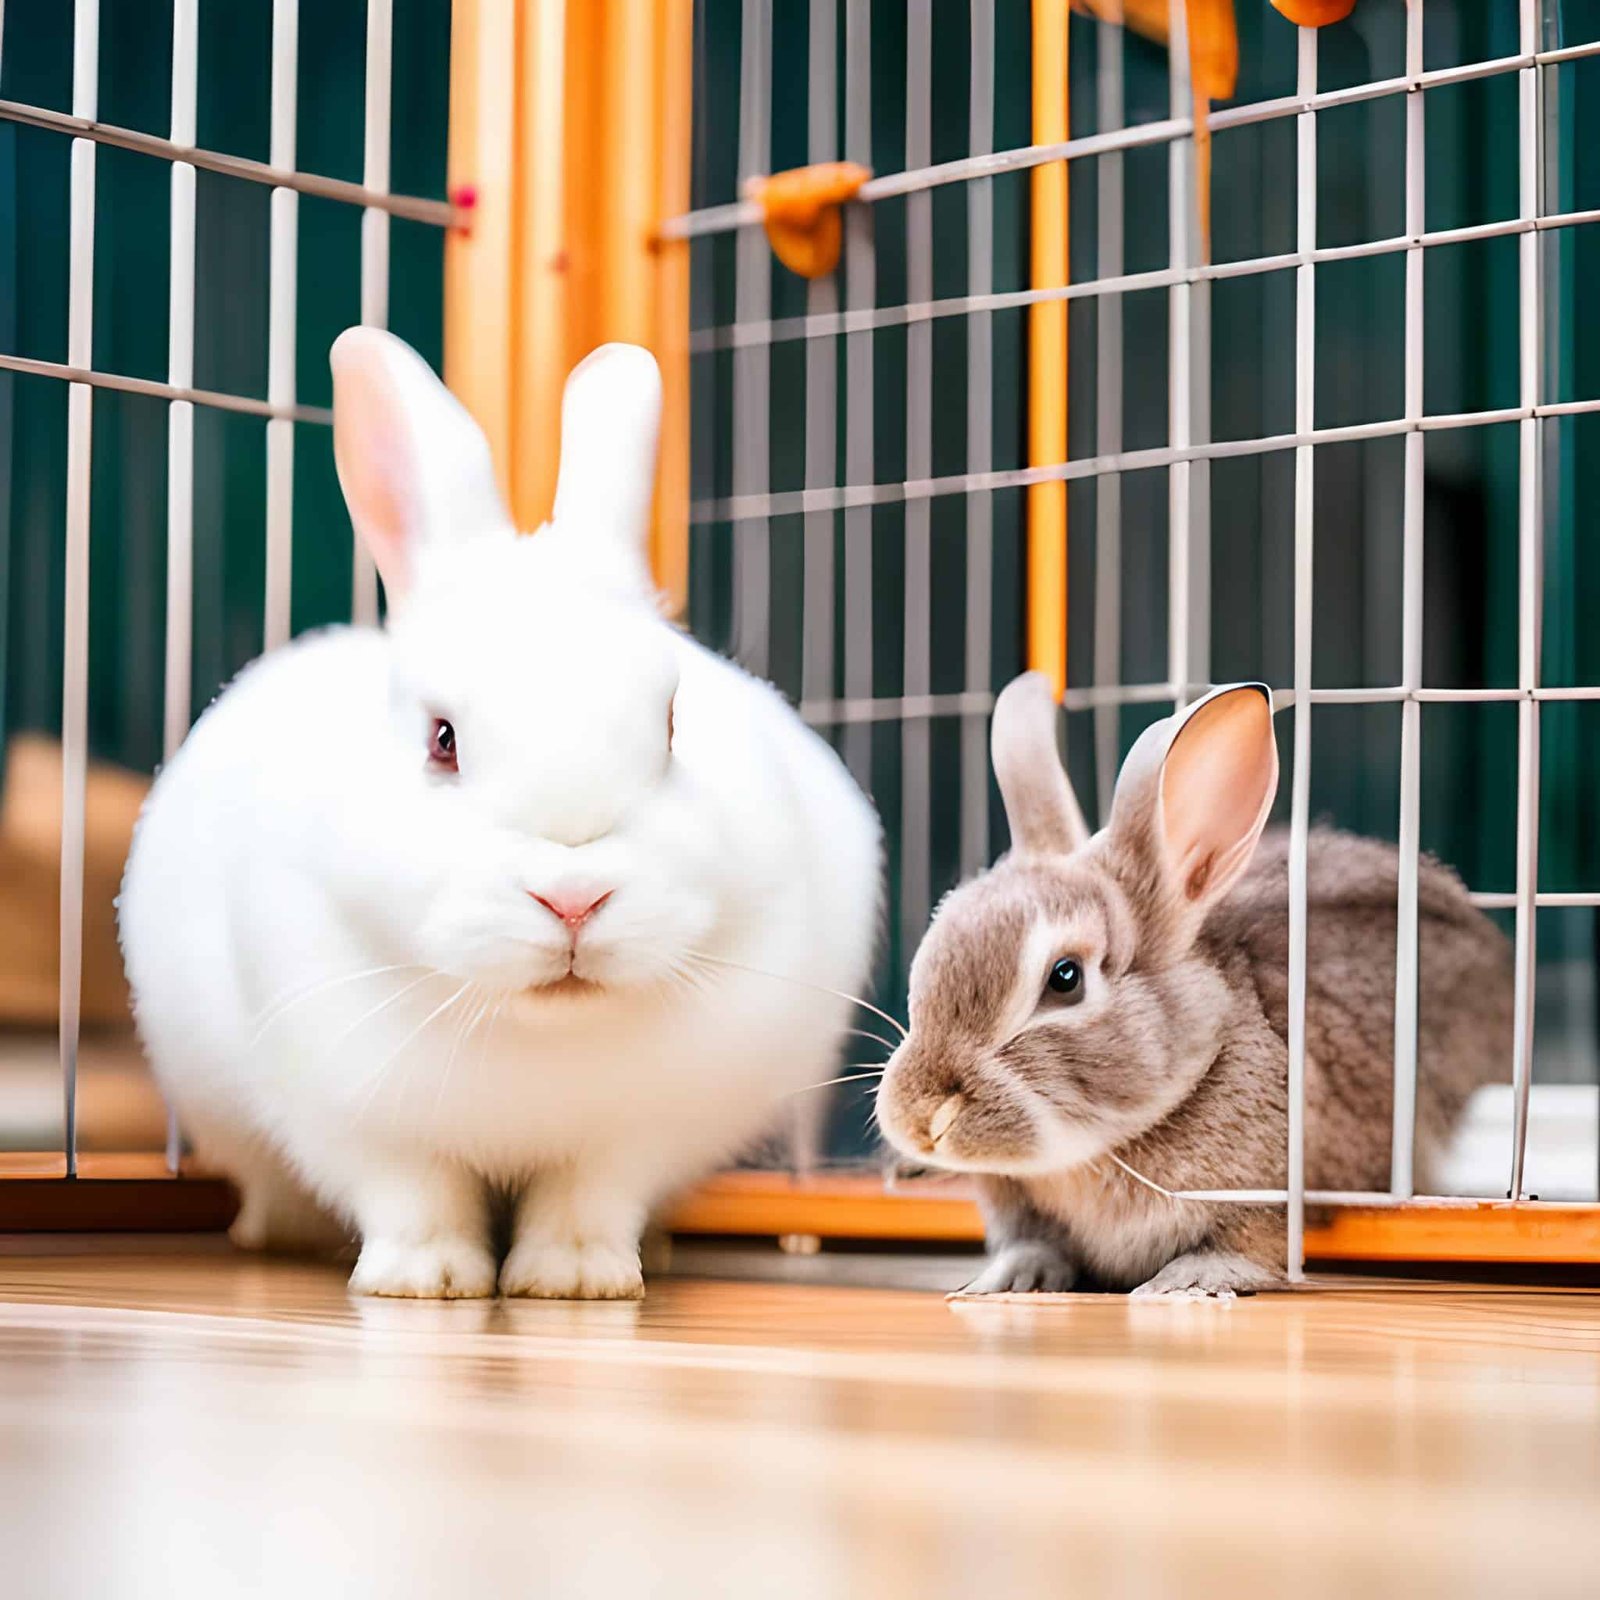 Best Rabbit Cage: Top Choices for Comfort and Safety